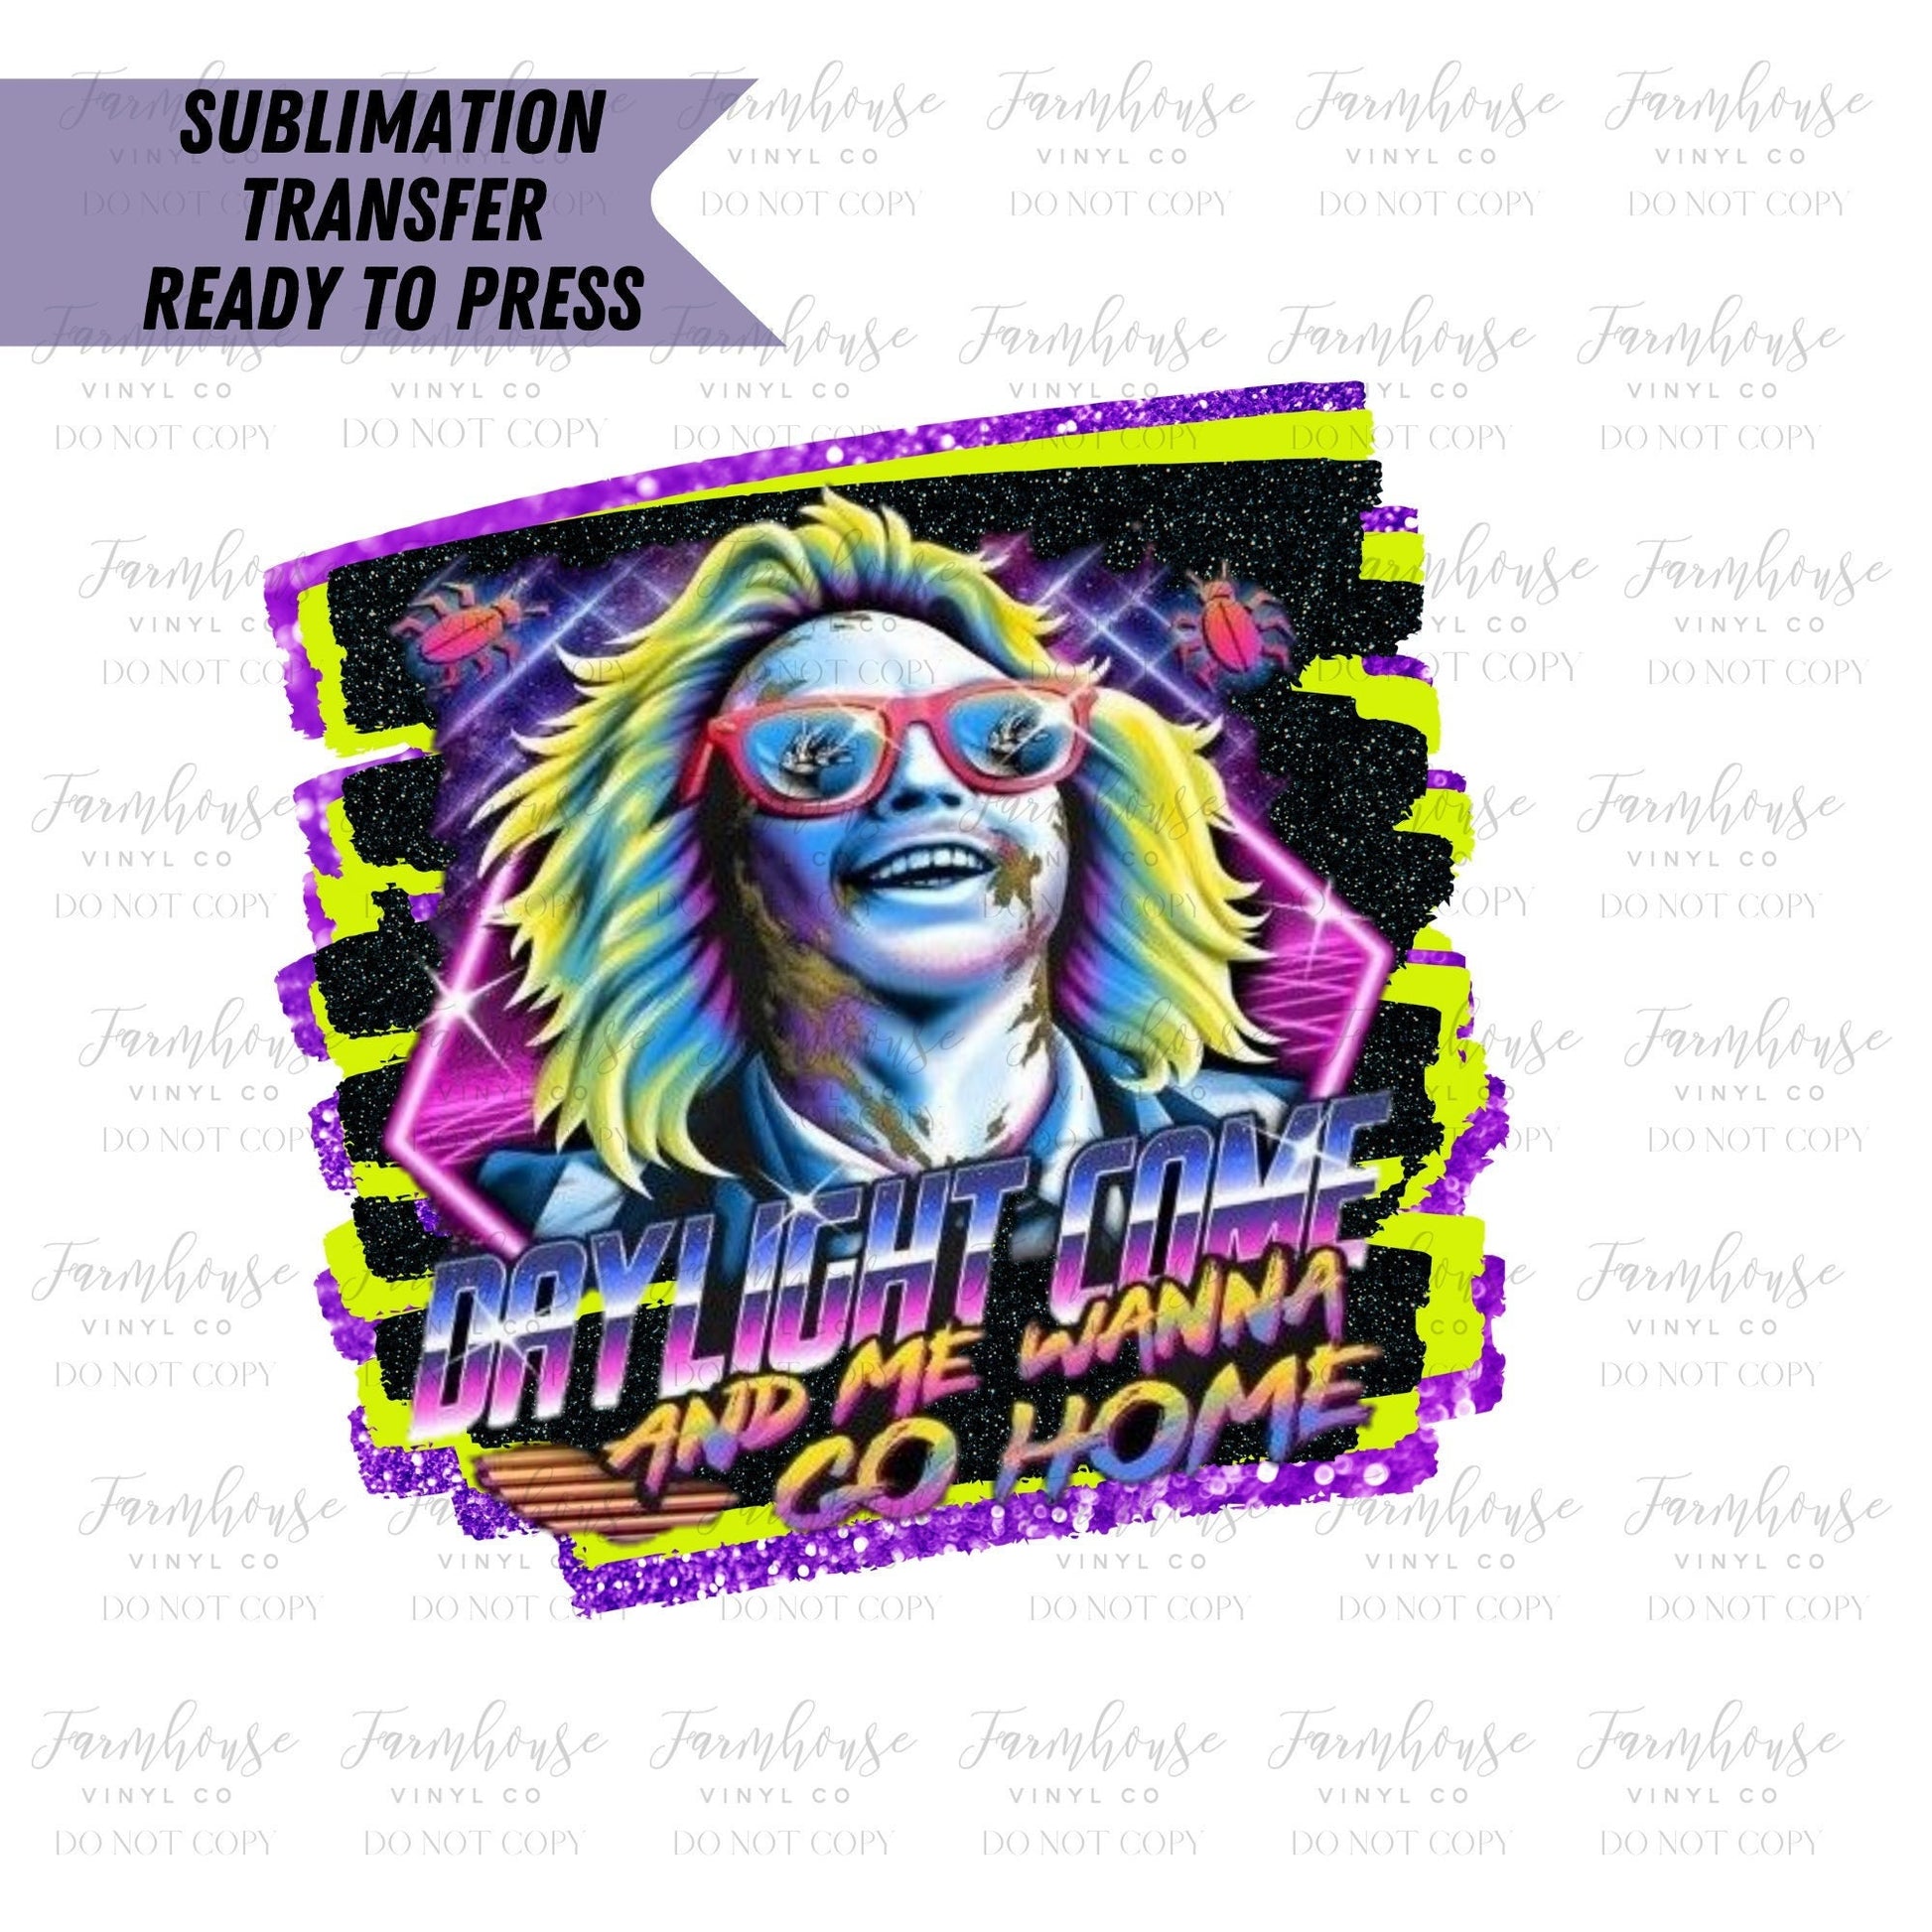 Beetlejuice Daylight Come and I Wanna Go Home Ready to Press Sublimation Transfer - Farmhouse Vinyl Co